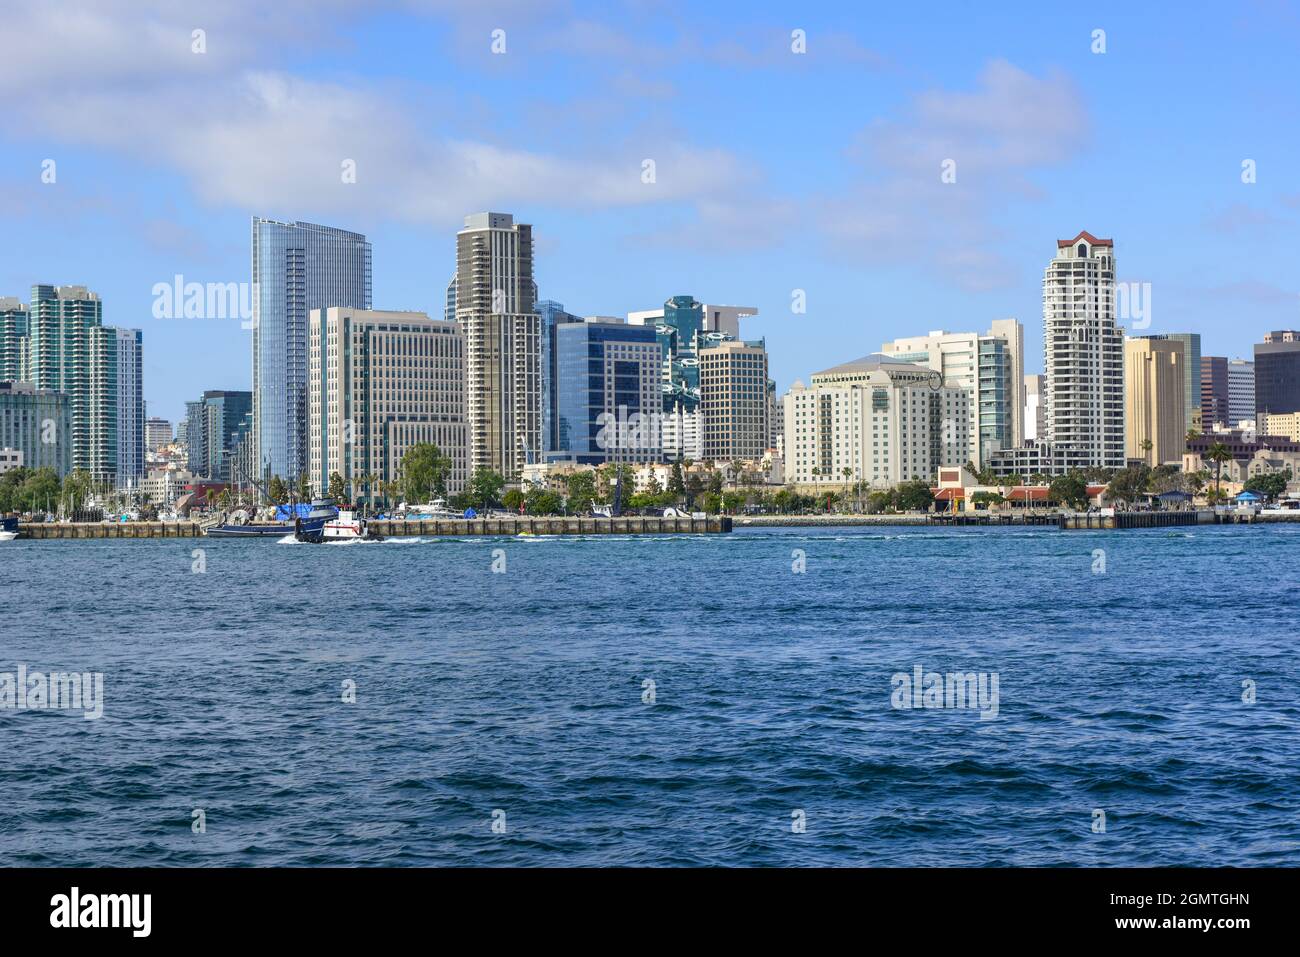 An impressive downtown San Diego skyline with modern high-rise buildings viewed from the San Diego Bay near Coronado Island in Southern California Stock Photo